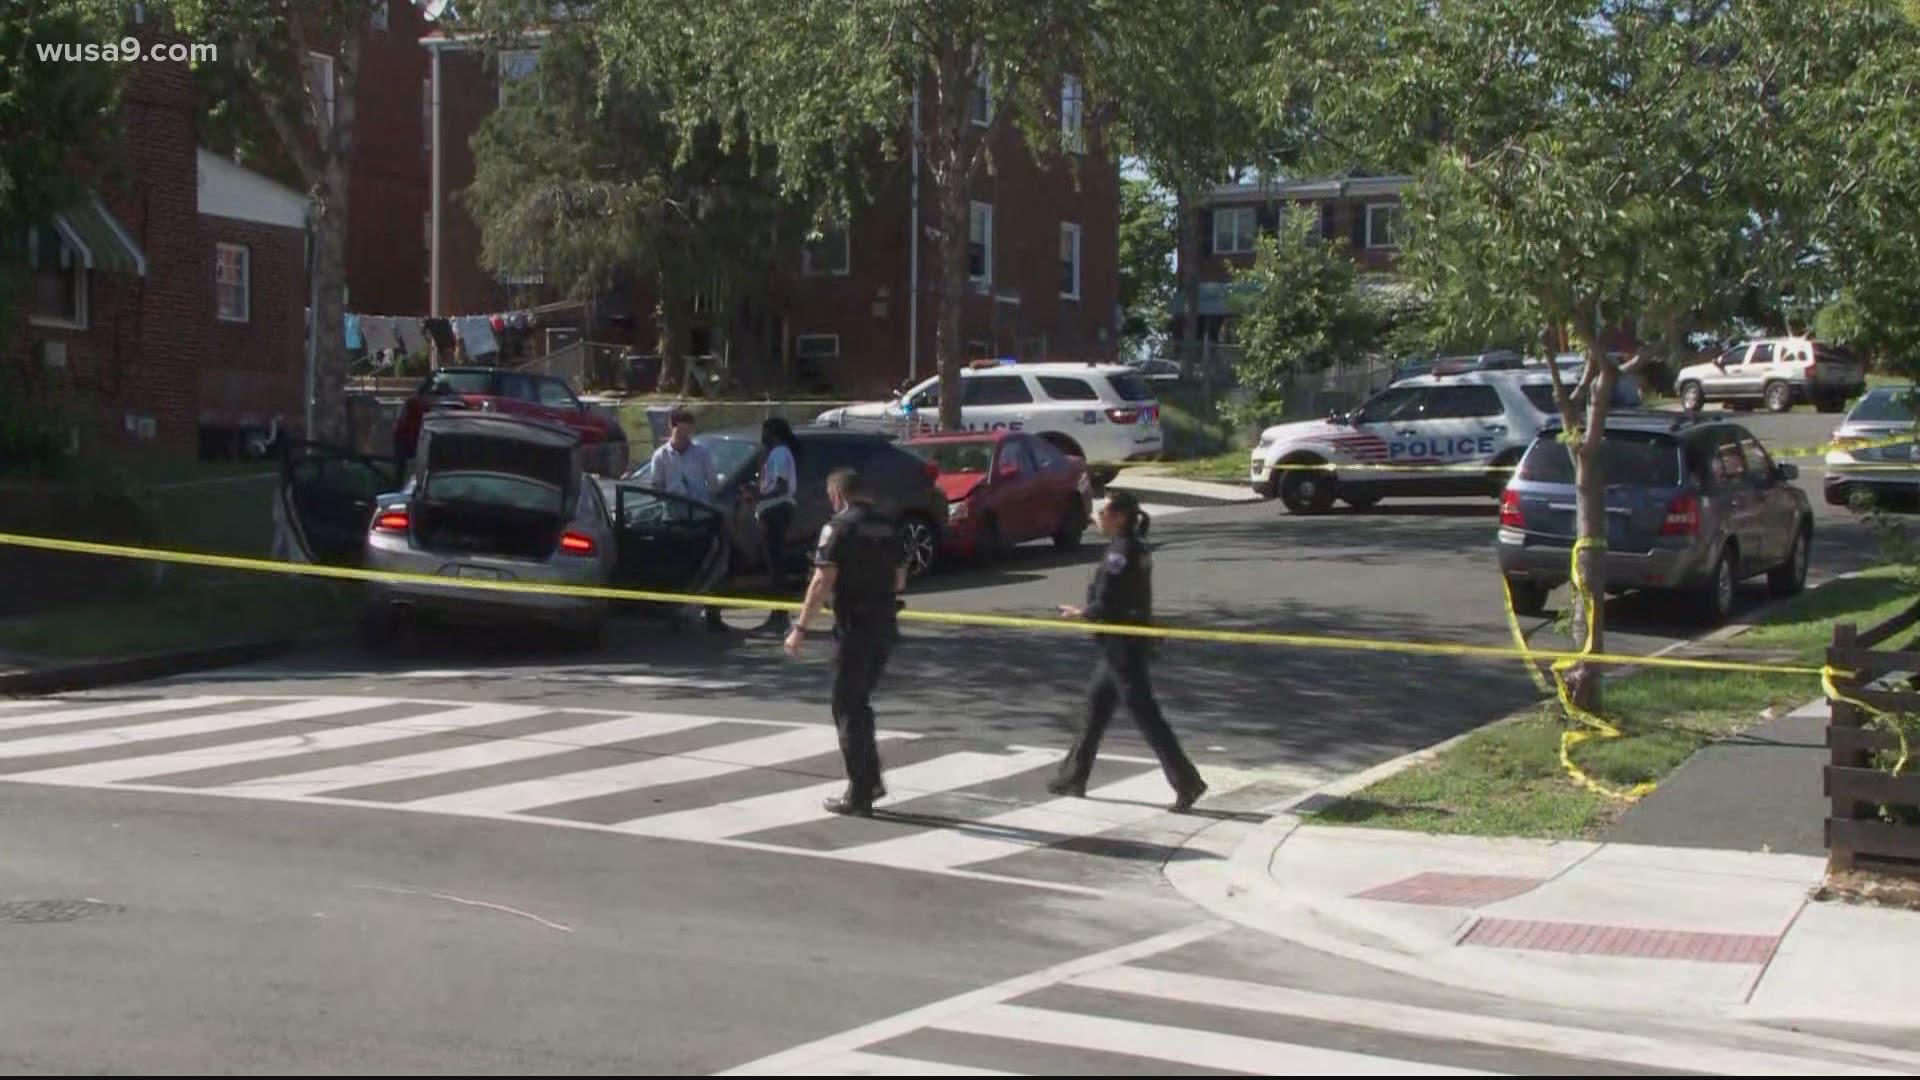 The shooting led to a chase across D.C., police say.